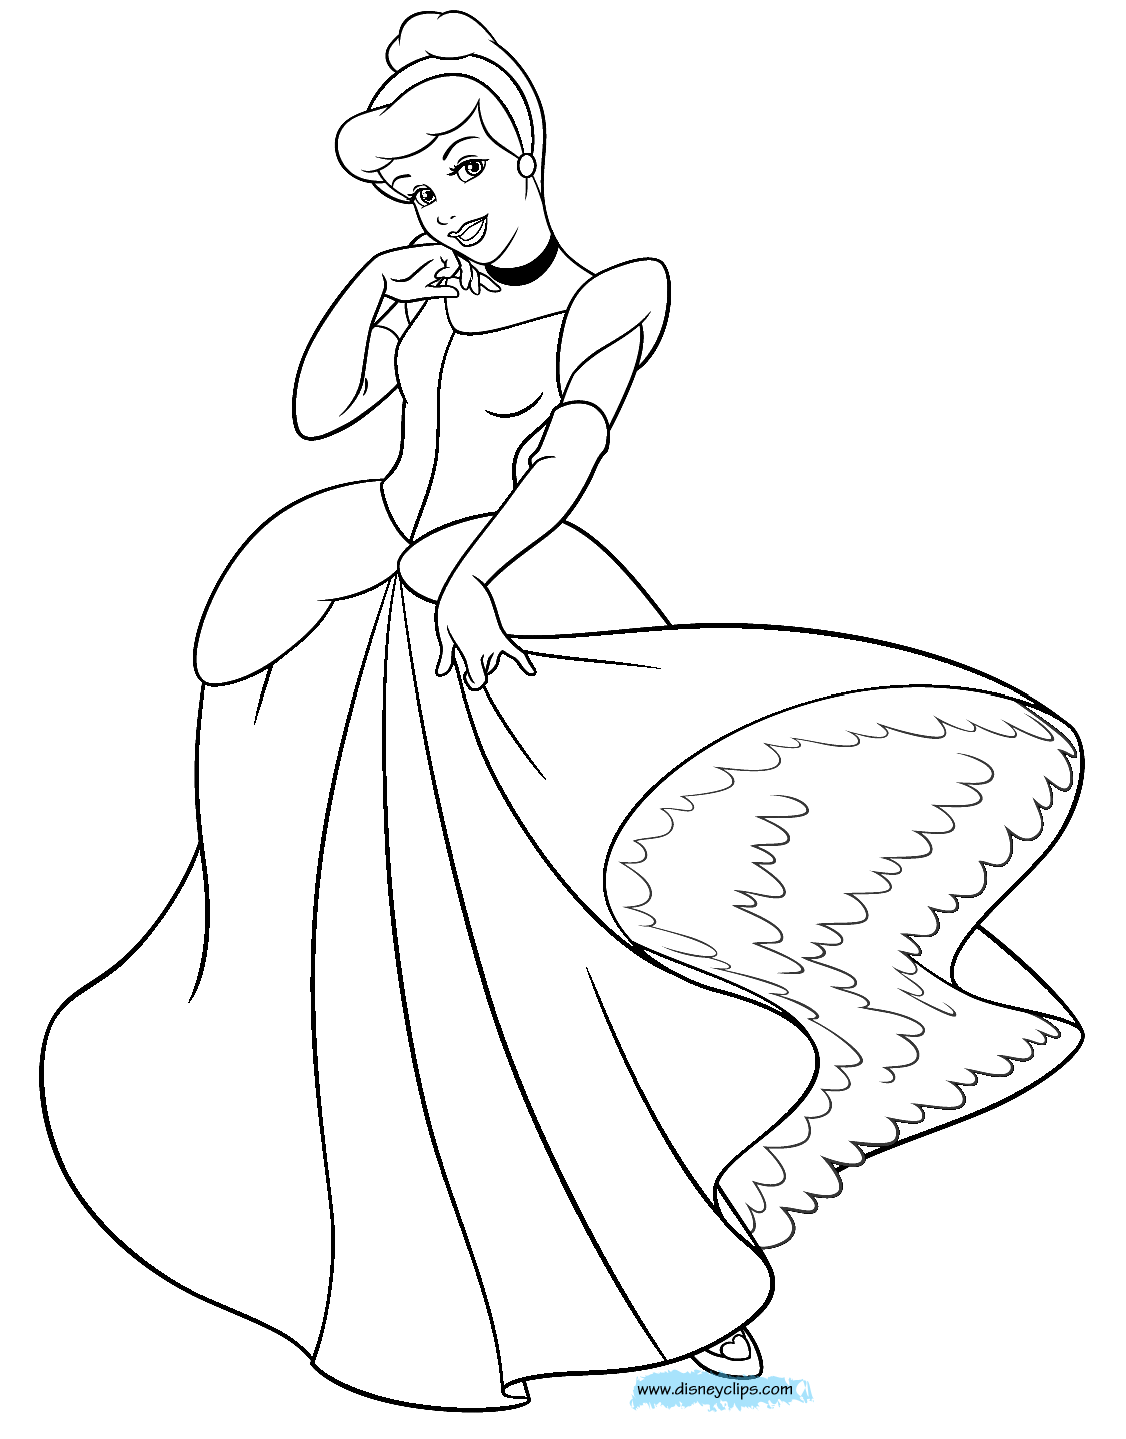 cinderella pictures to print and color disney39s cinderella coloring pages disneyclipscom print pictures to color and cinderella 